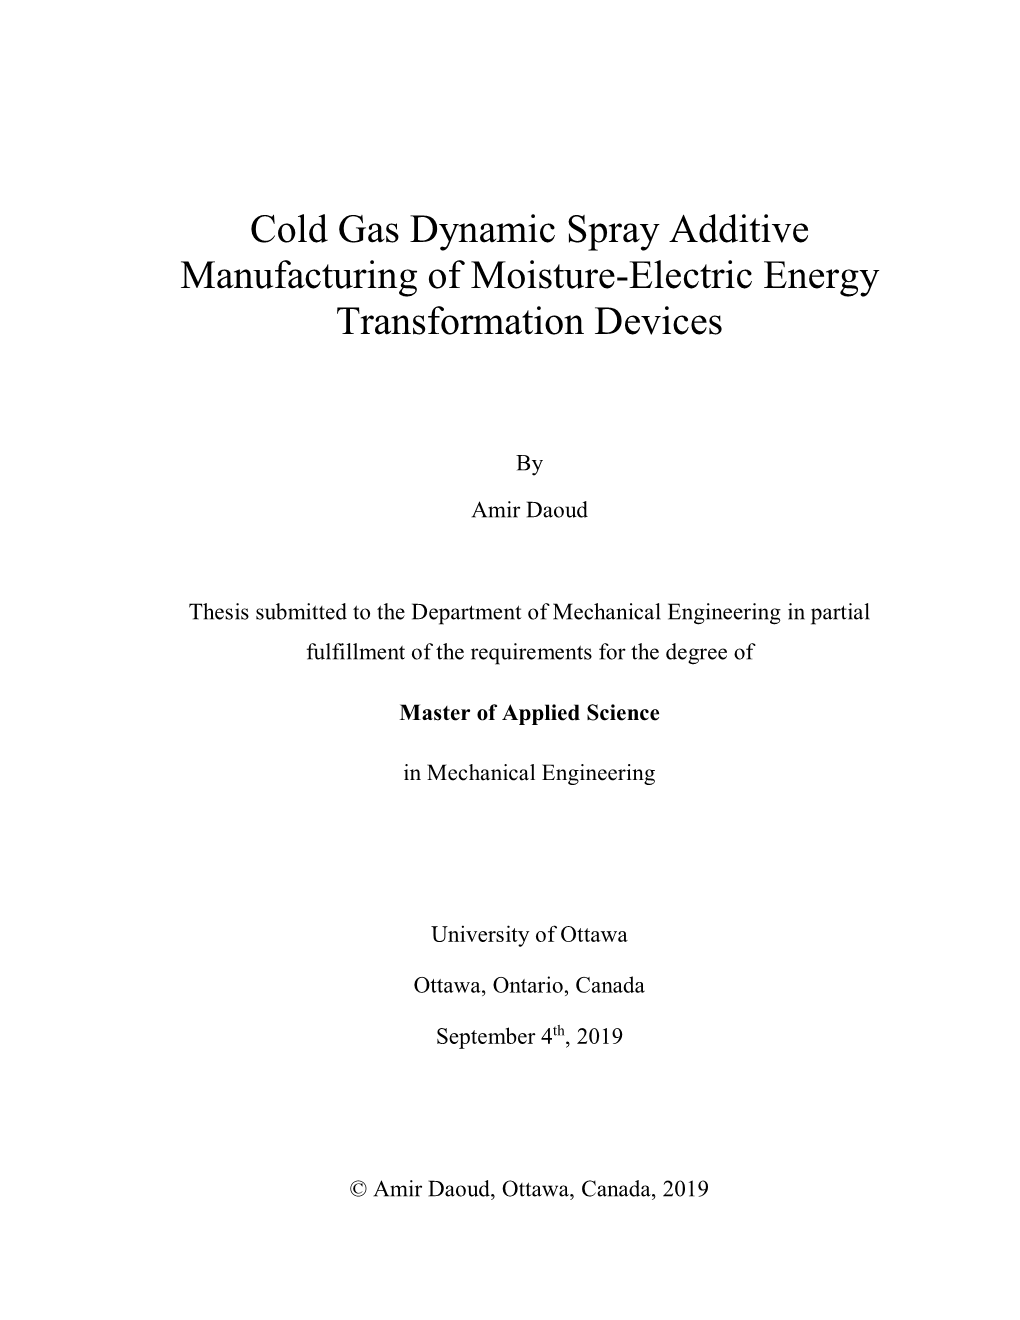 Cold Gas Dynamic Spray Additive Manufacturing of Moisture-Electric Energy Transformation Devices